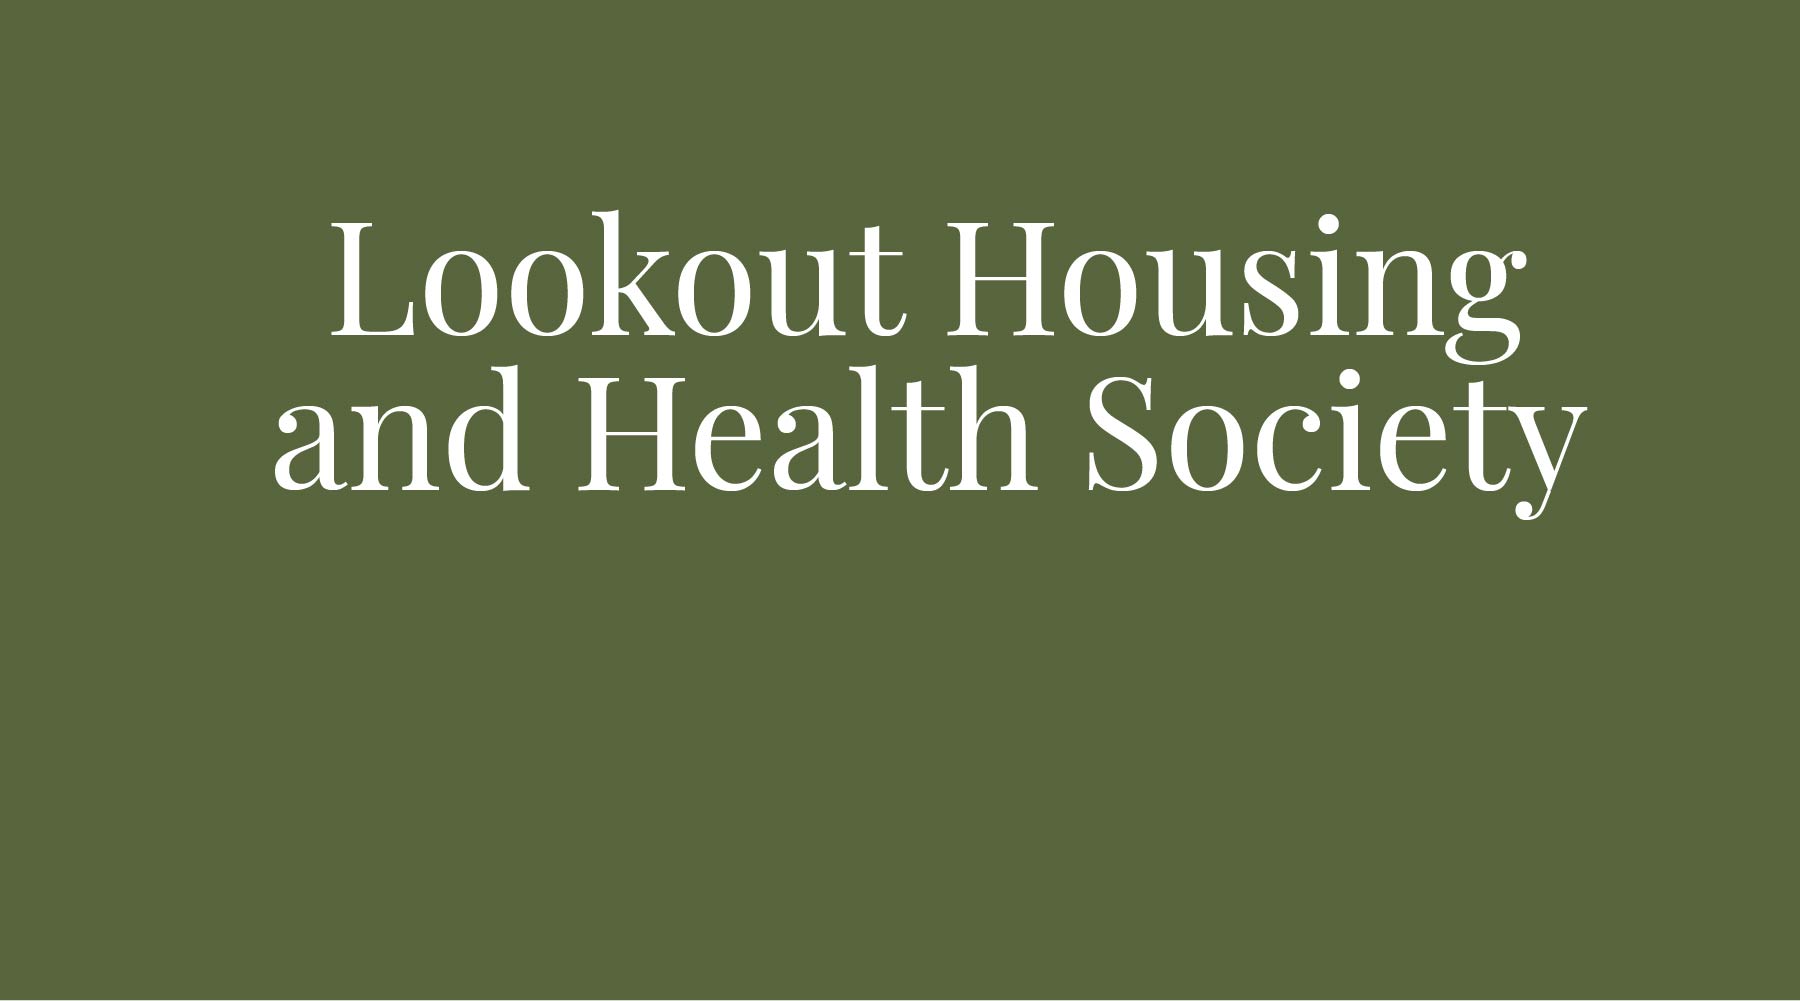 DECEMBER NON-PROFIT - LOOKOUT HOUSING AND HEALTH SOCIETY